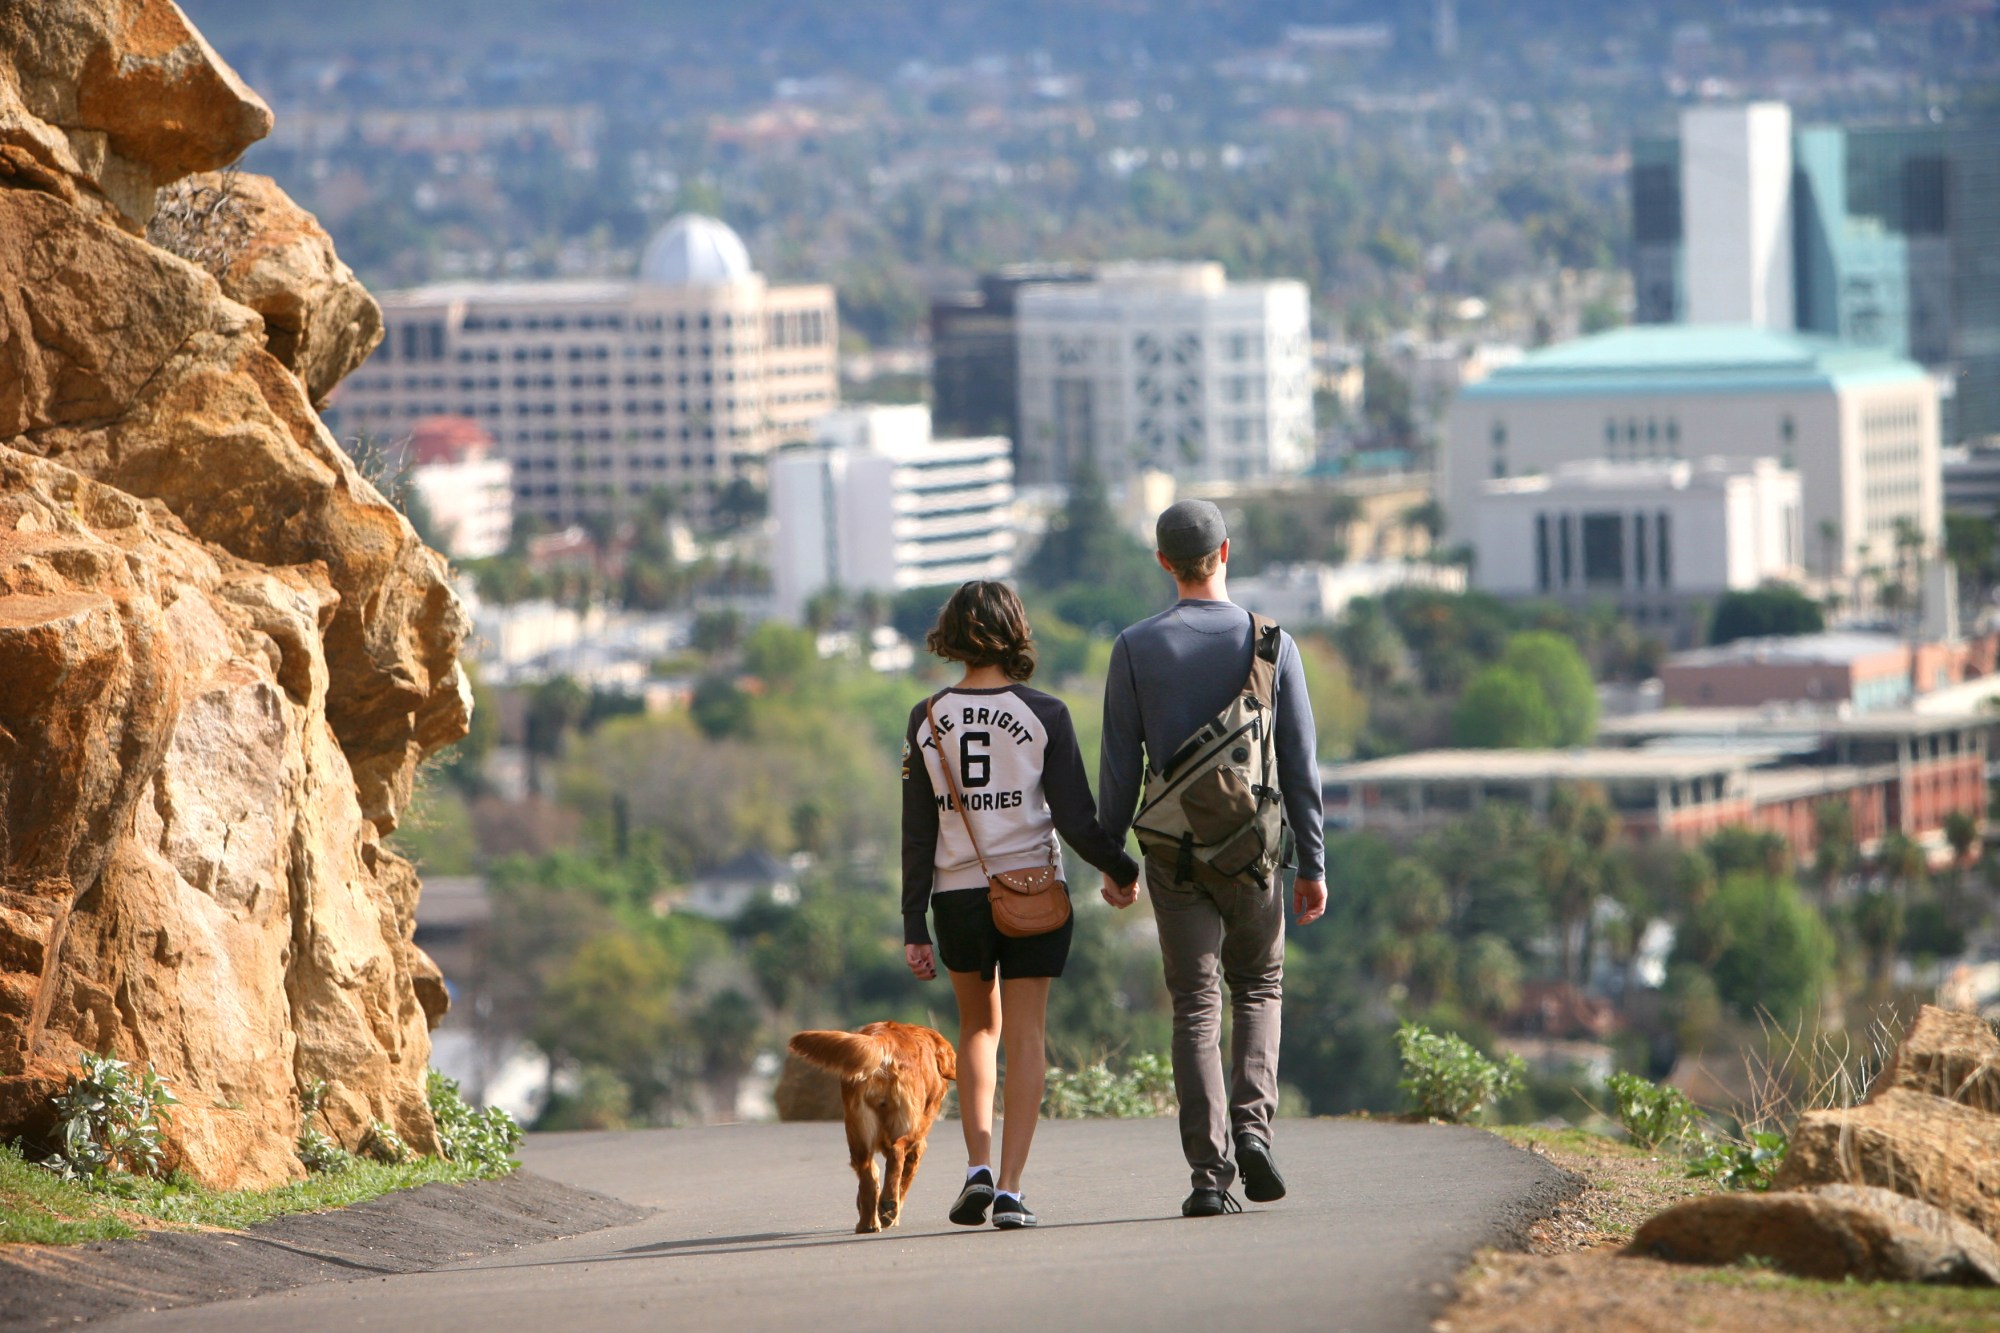 Jacquelyn Medina, at left, and Loren Ferard with Bailey the dog make their way down Mt. Rubidouix on Friday, January 29,2010. This last year there have been several improvements to Mount Rubidoux Park, including repaving the road up, a new front gate, new rock walls, and rock and iron benches. (Kurt Miller, The Press-Enterprise)